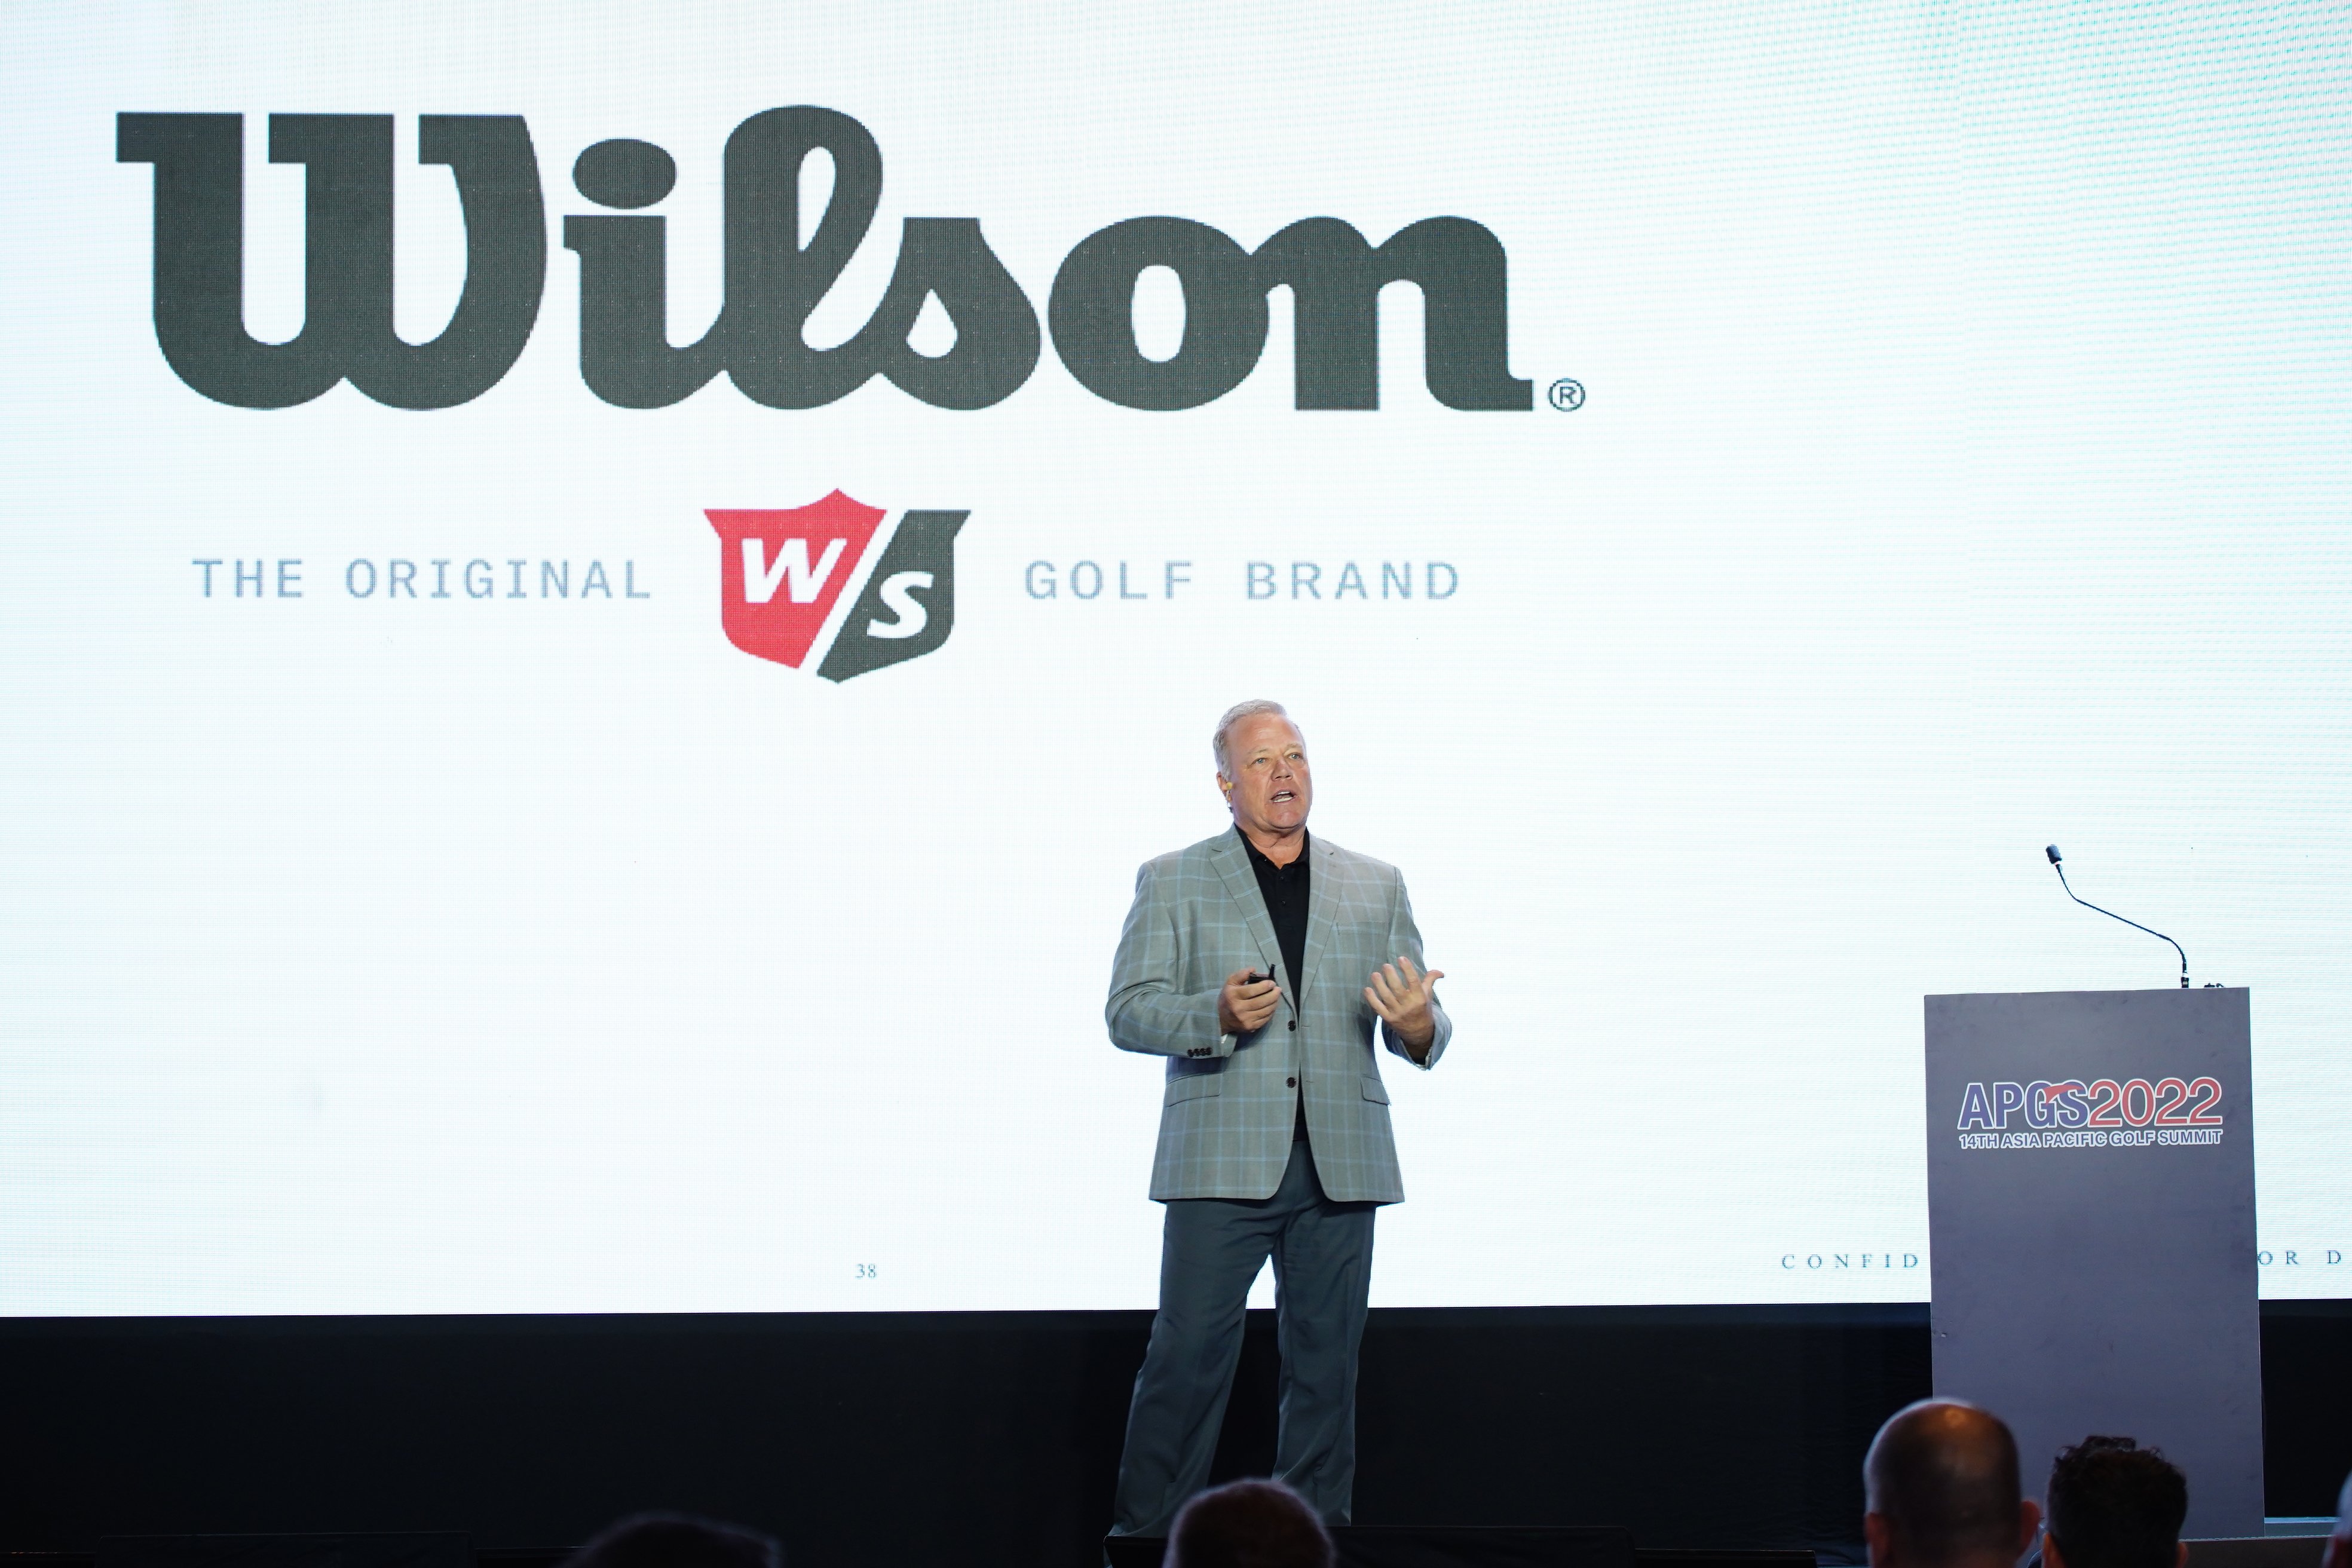 The President and CEO of Wilson Golf, Tim Clarke